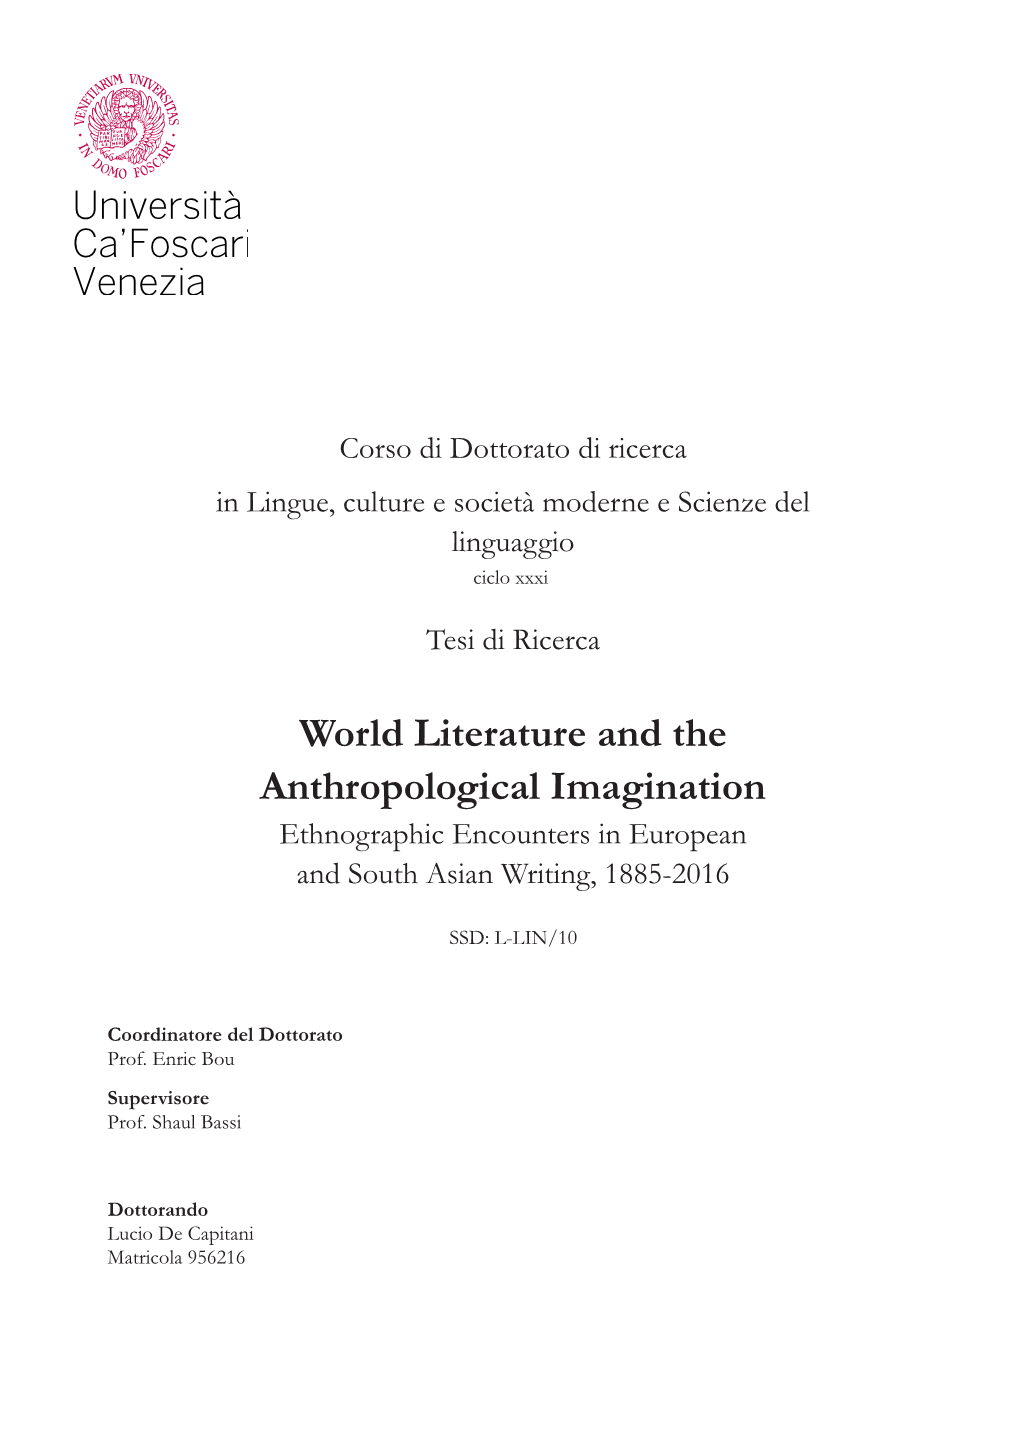 World Literature and the Anthropological Imagination Ethnographic Encounters in European and South Asian Writing, 1885-2016